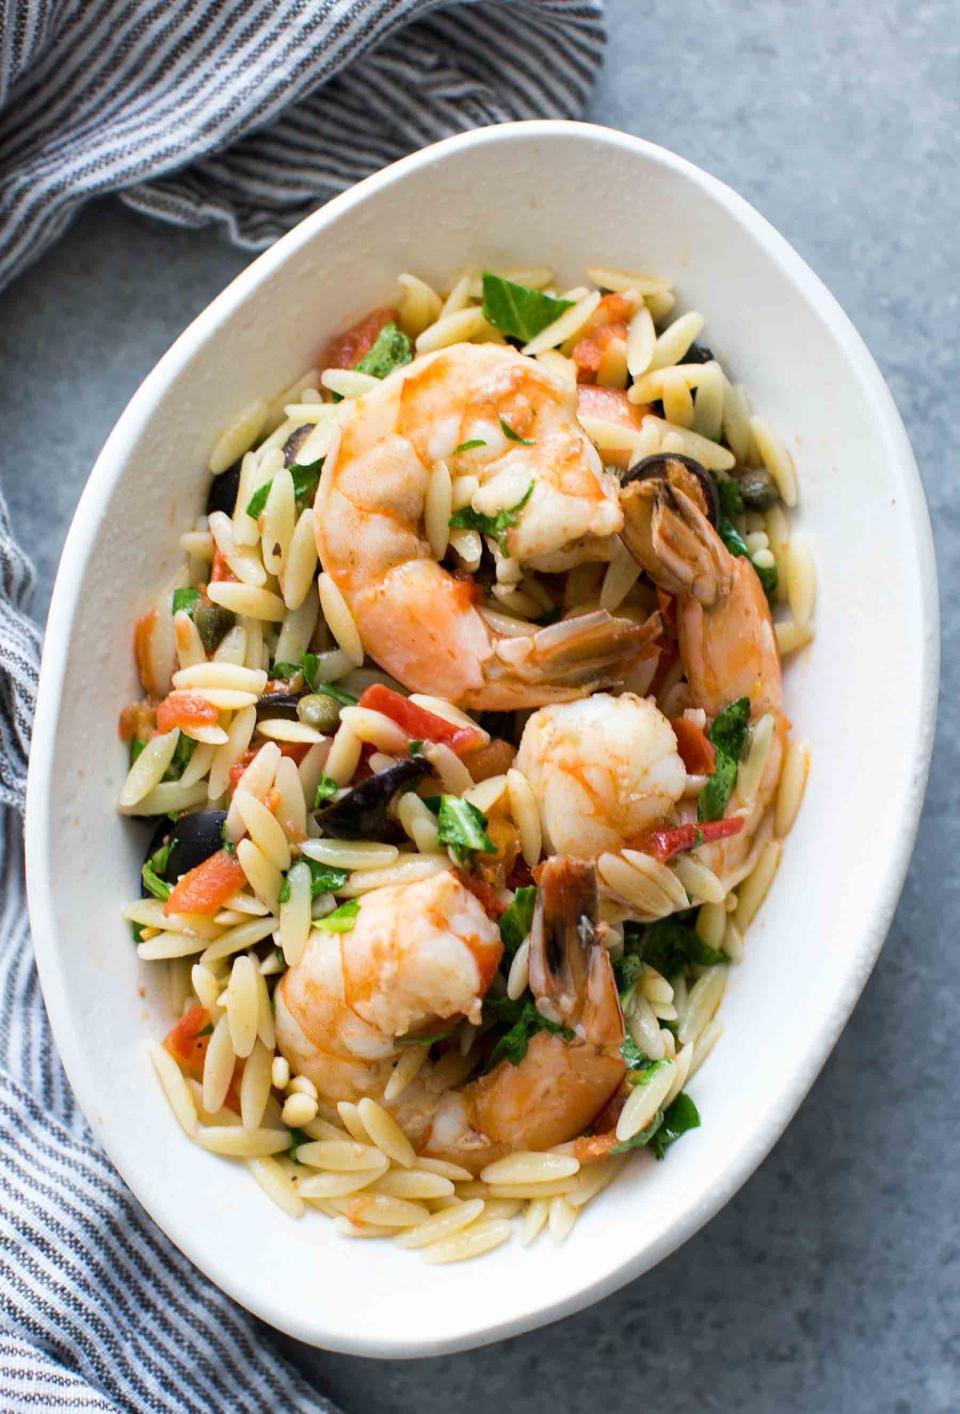 <strong>Get the <a href="http://www.simplyrecipes.com/recipes/shrimp_with_olives_tomatoes_and_orzo/" target="_blank">Shrimp with Olives, Tomatoes, and Orzo recipe</a>&nbsp;from Simply Recipes</strong>